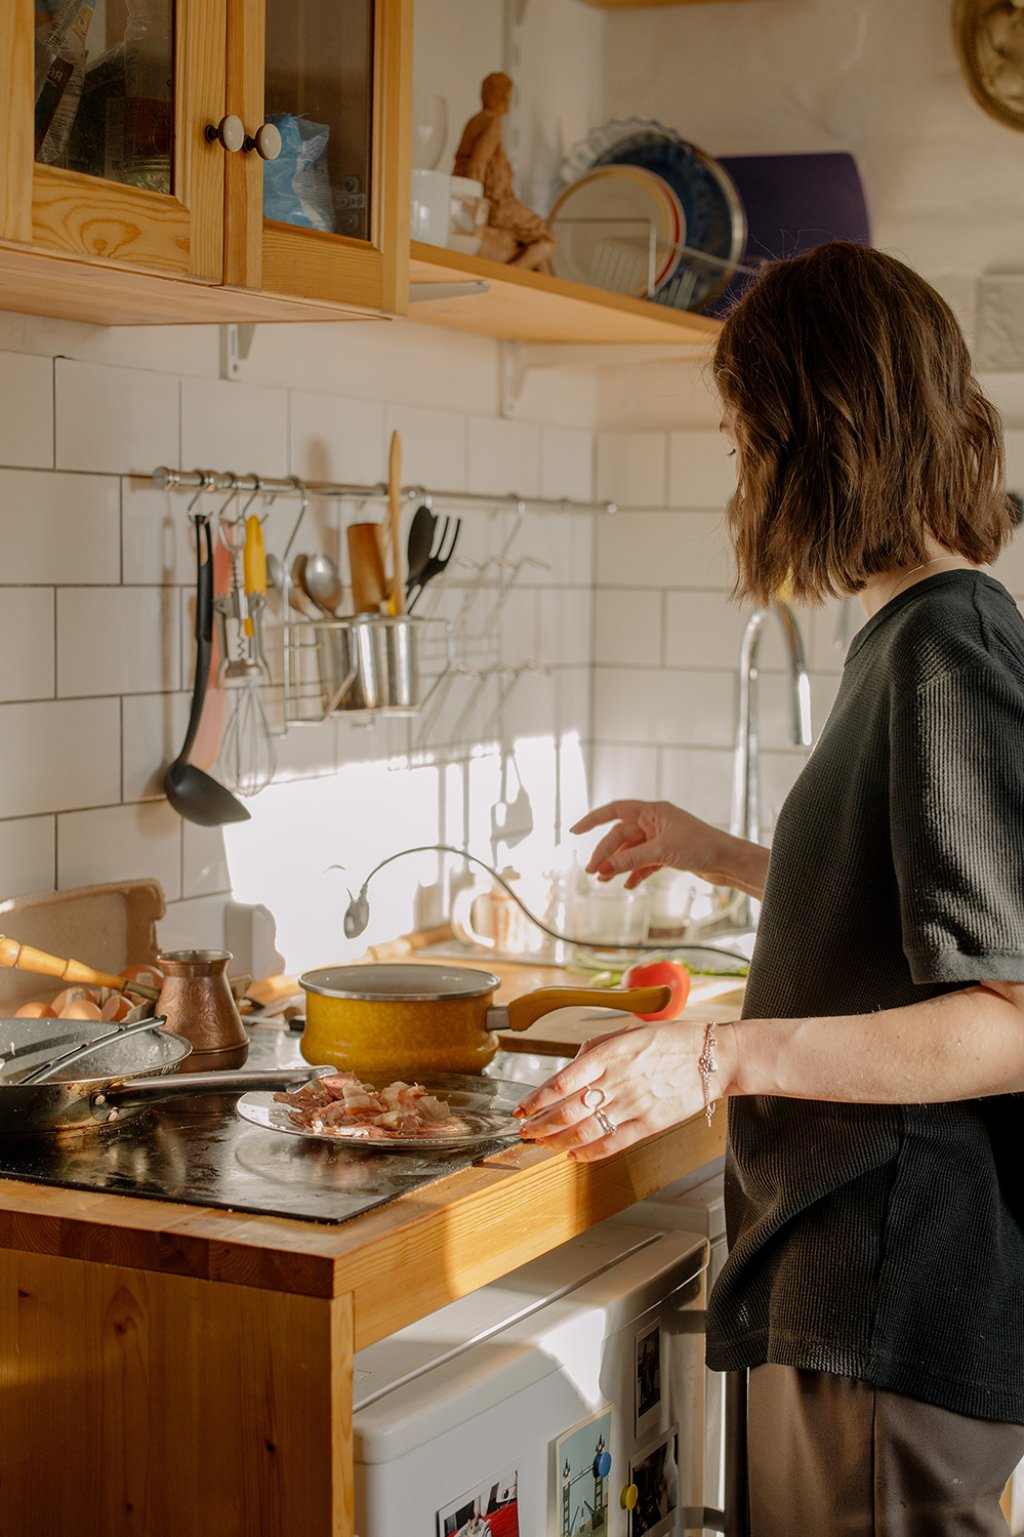 Woman in grey T-shirt, standing in front of kitchen sink, cooking on a ceramic hob countertop kitchen. Photo by CottonBro Studio on Pexels.